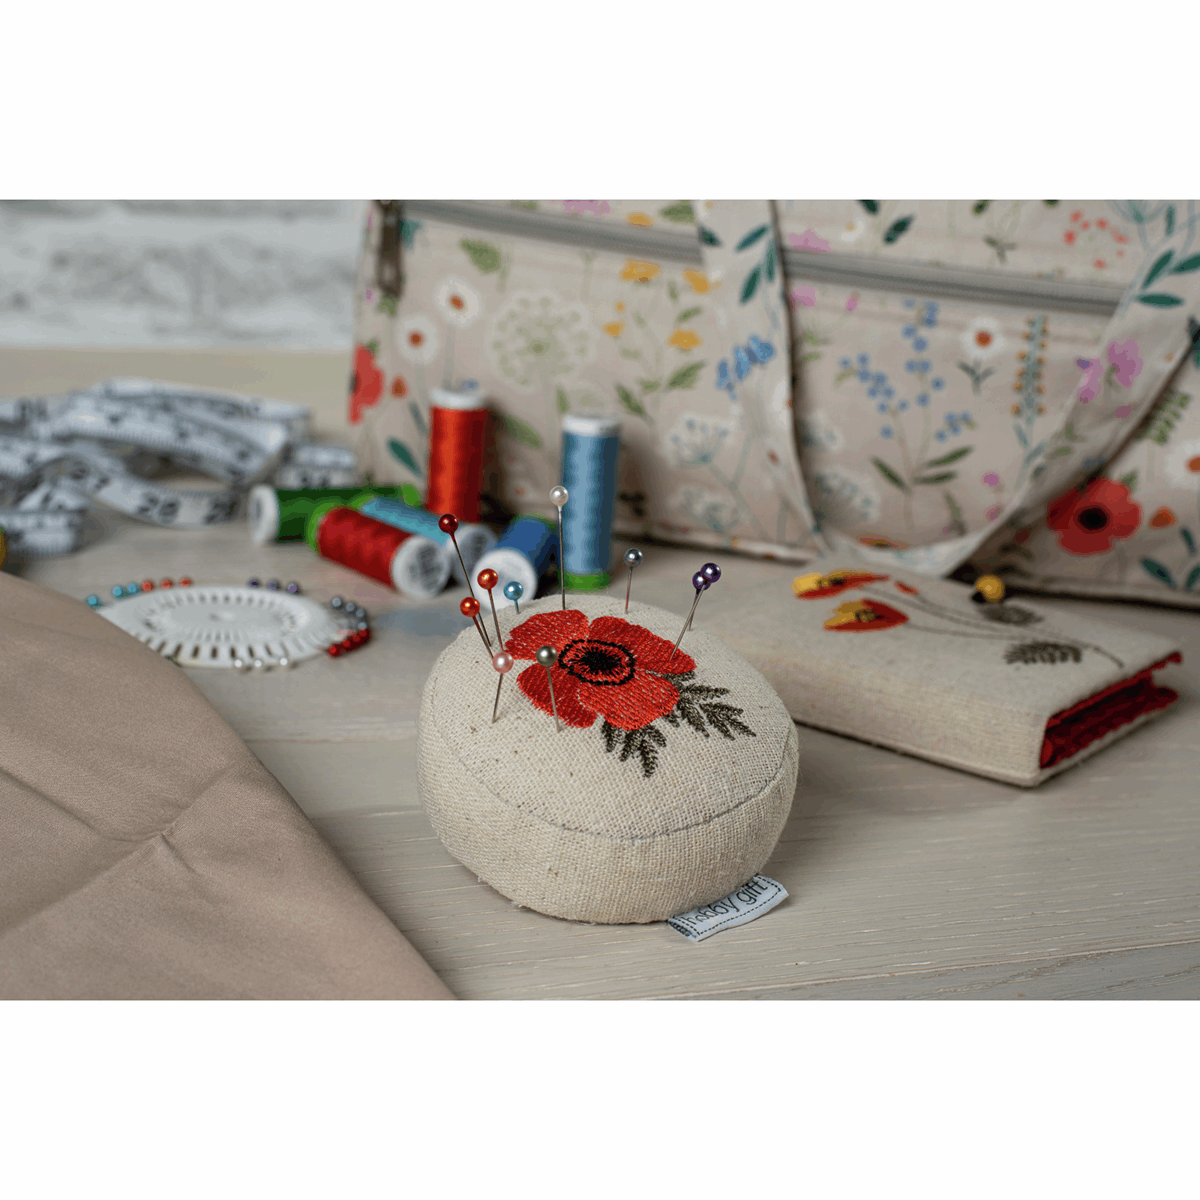 Wildflowers Embroidered Dome Pincushion